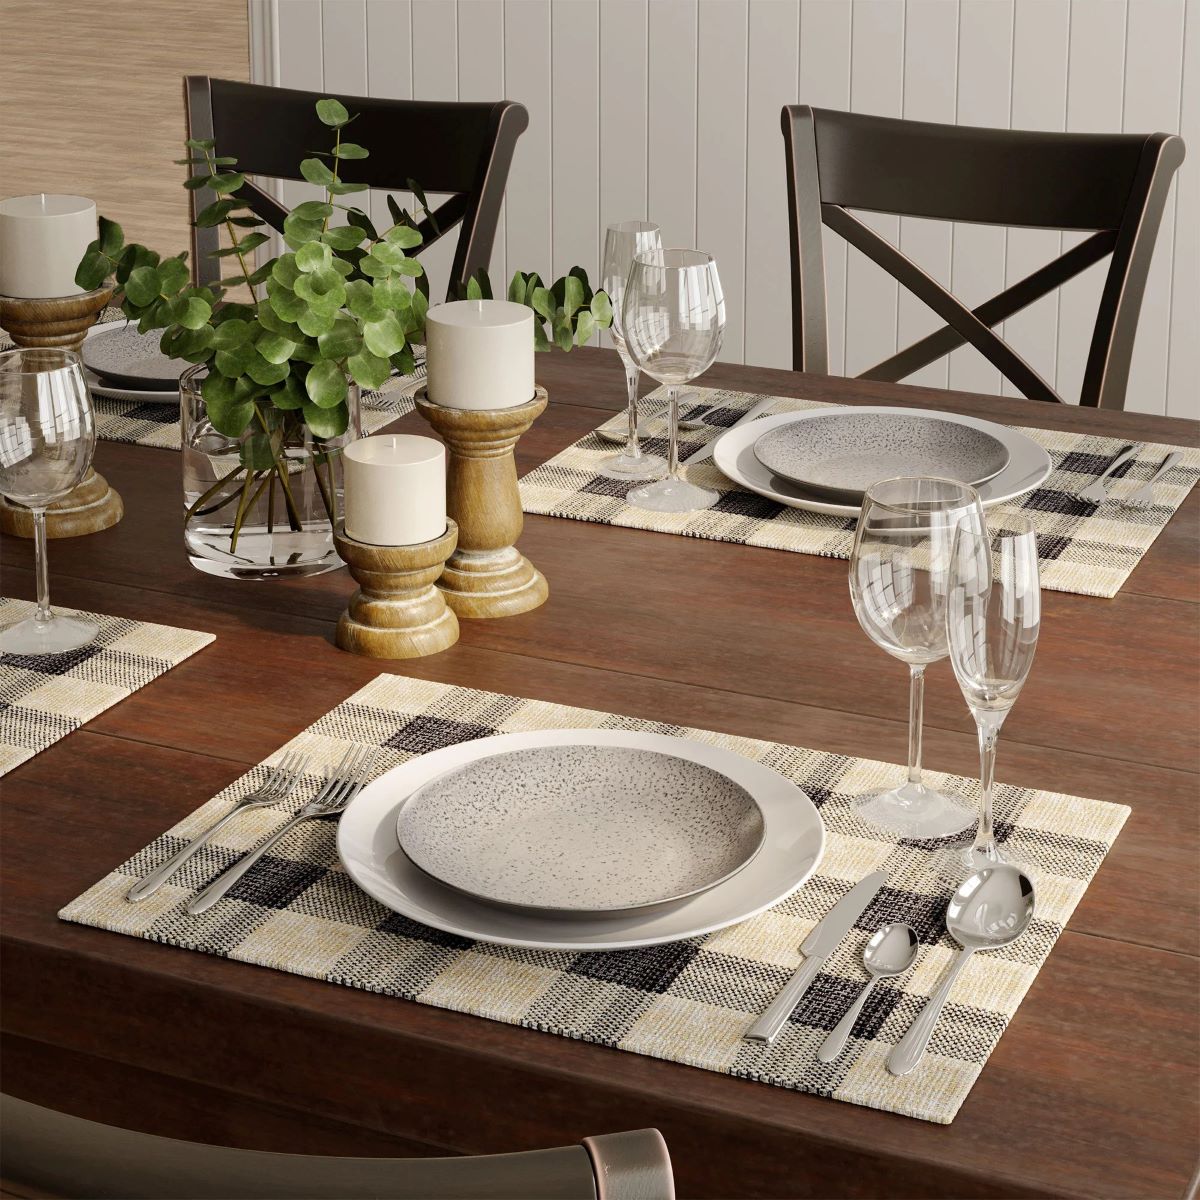 What Color Placemats For A Wood Table